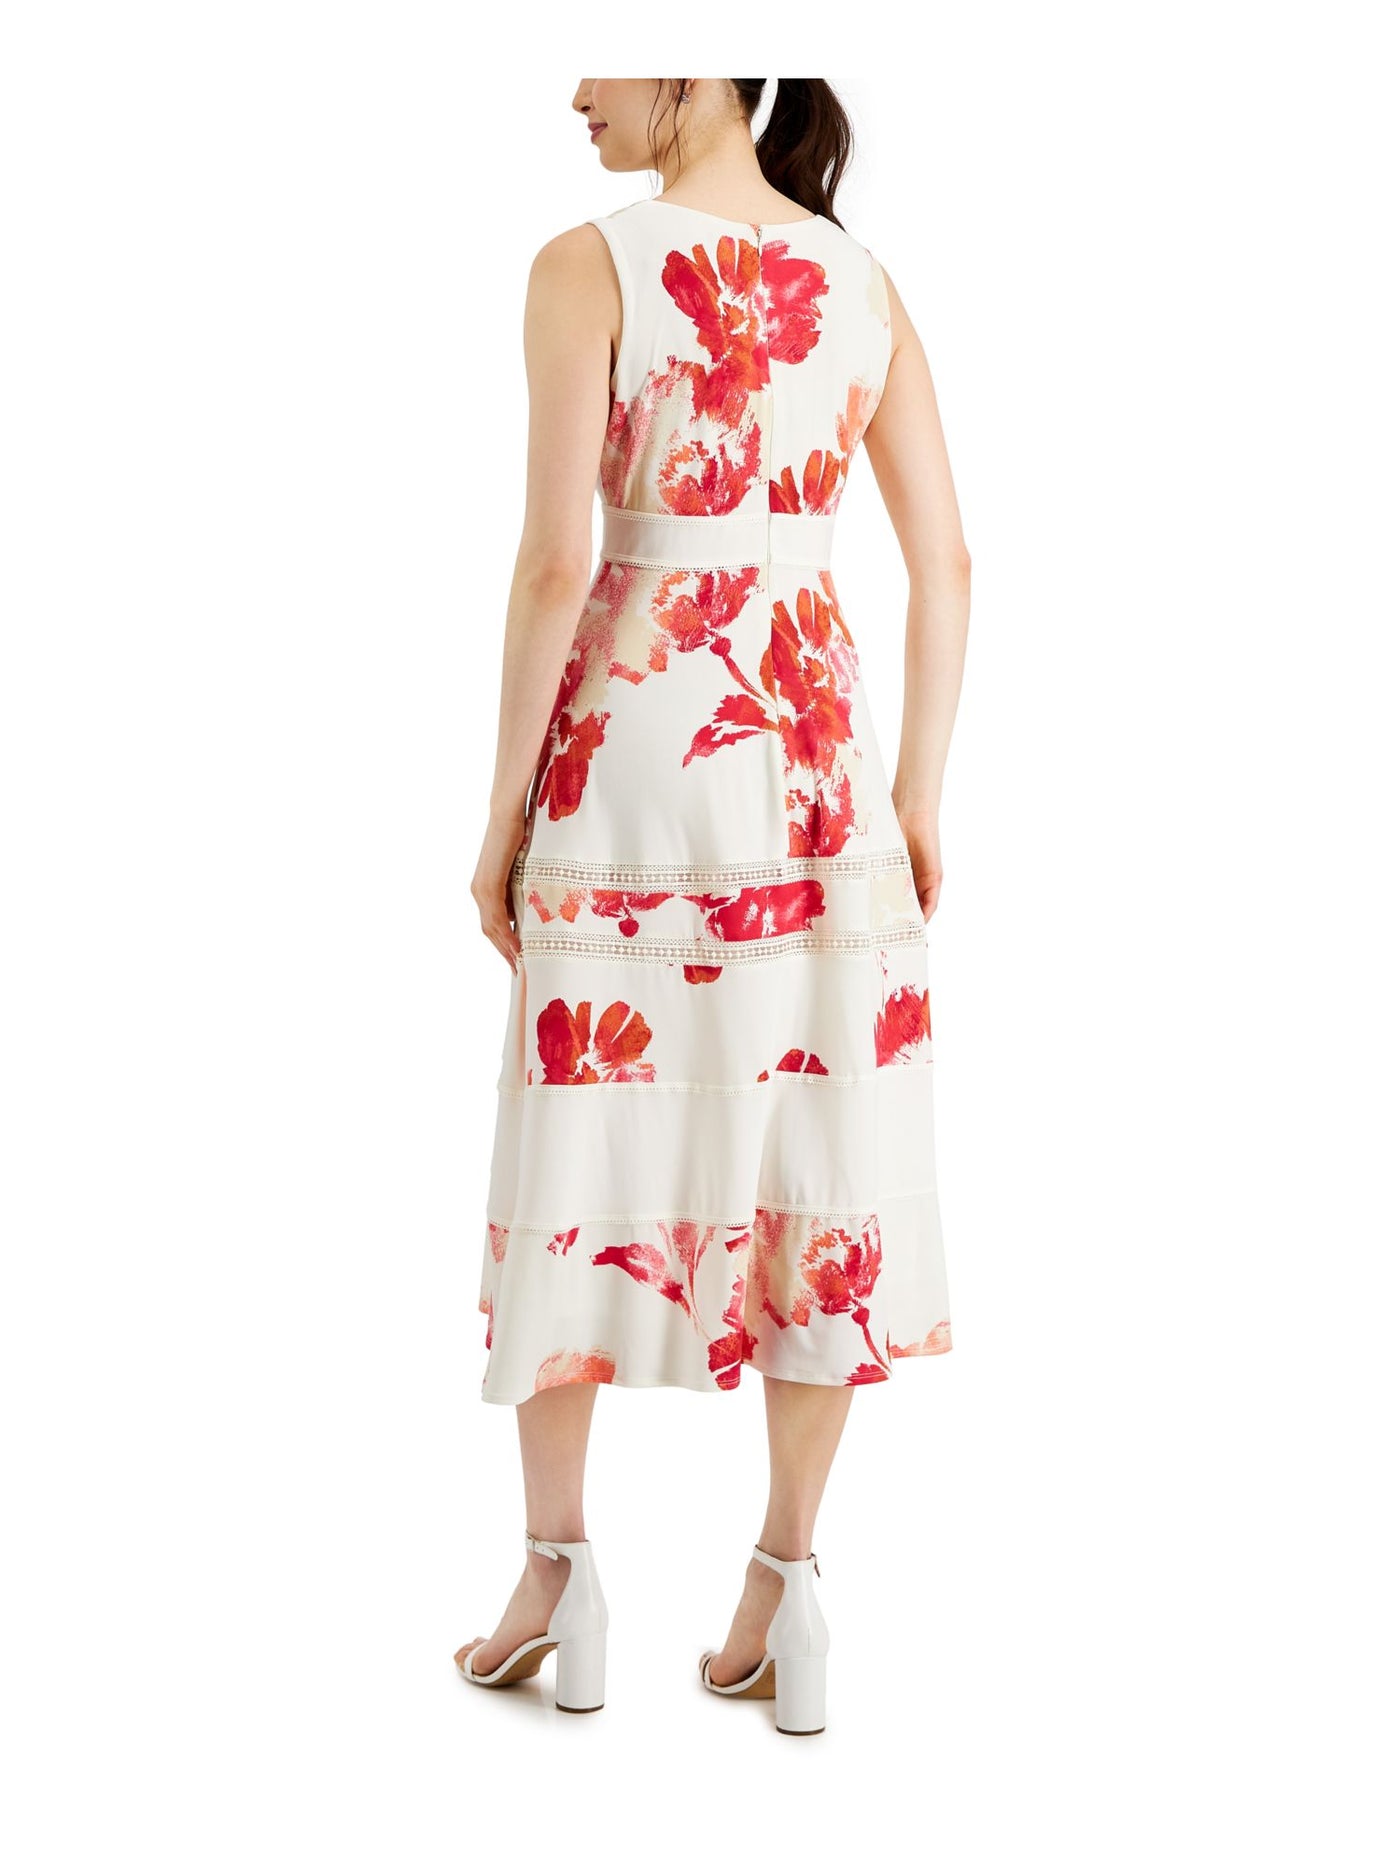 TAYLOR Womens Ivory Stretch Zippered Lace Trim Printed Sleeveless V Neck Midi Fit + Flare Dress 2